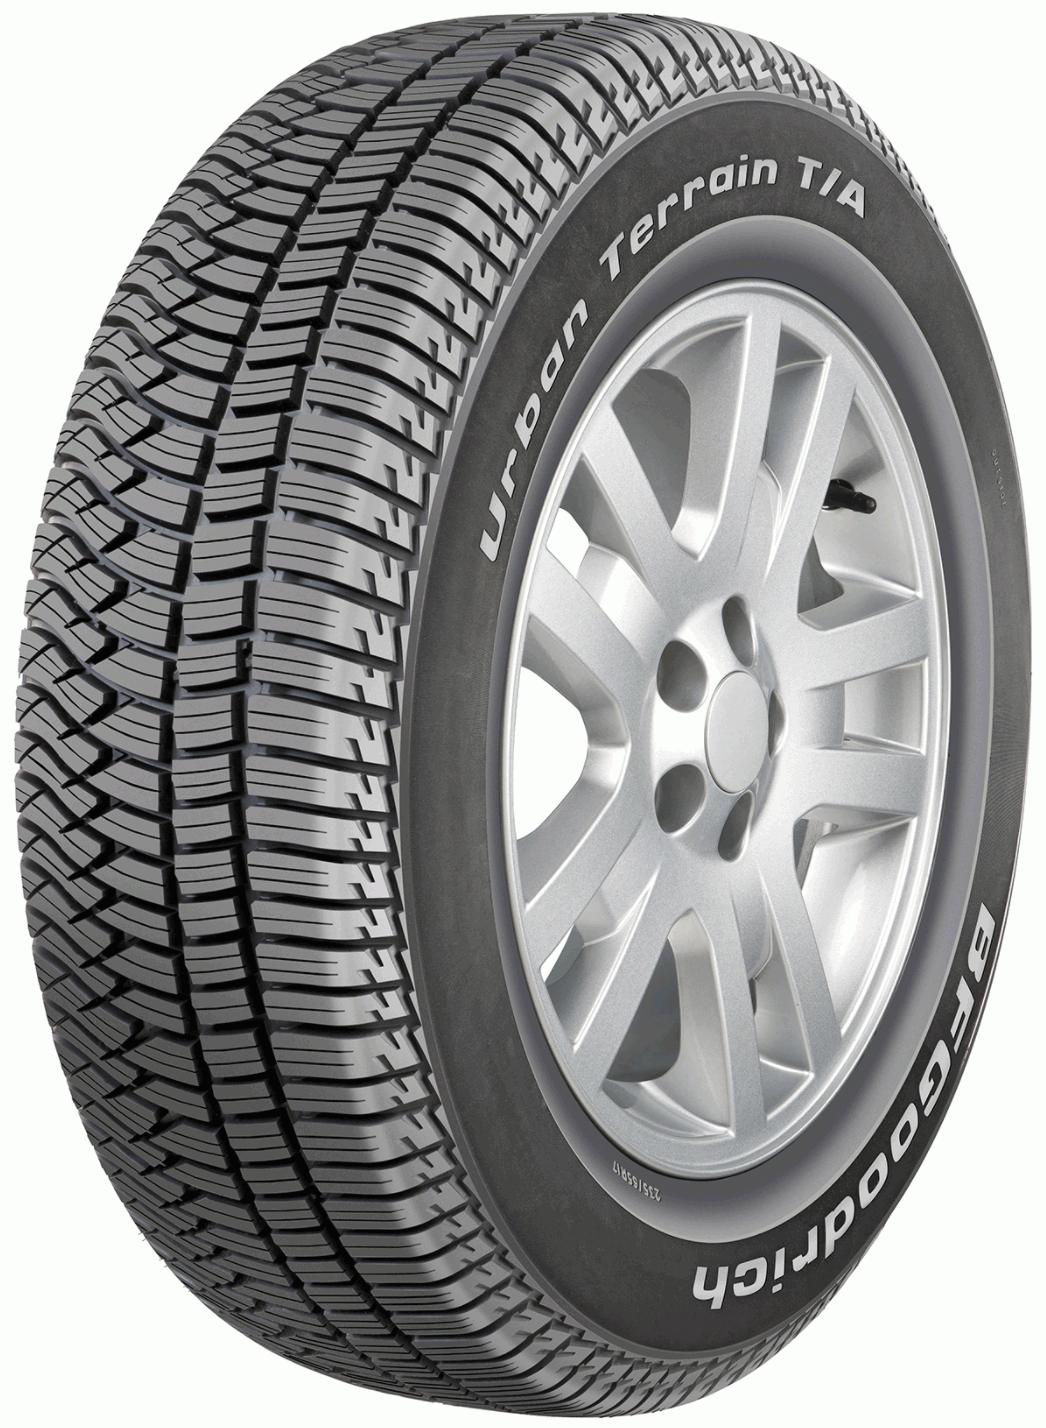 Bf goodrich tyres review